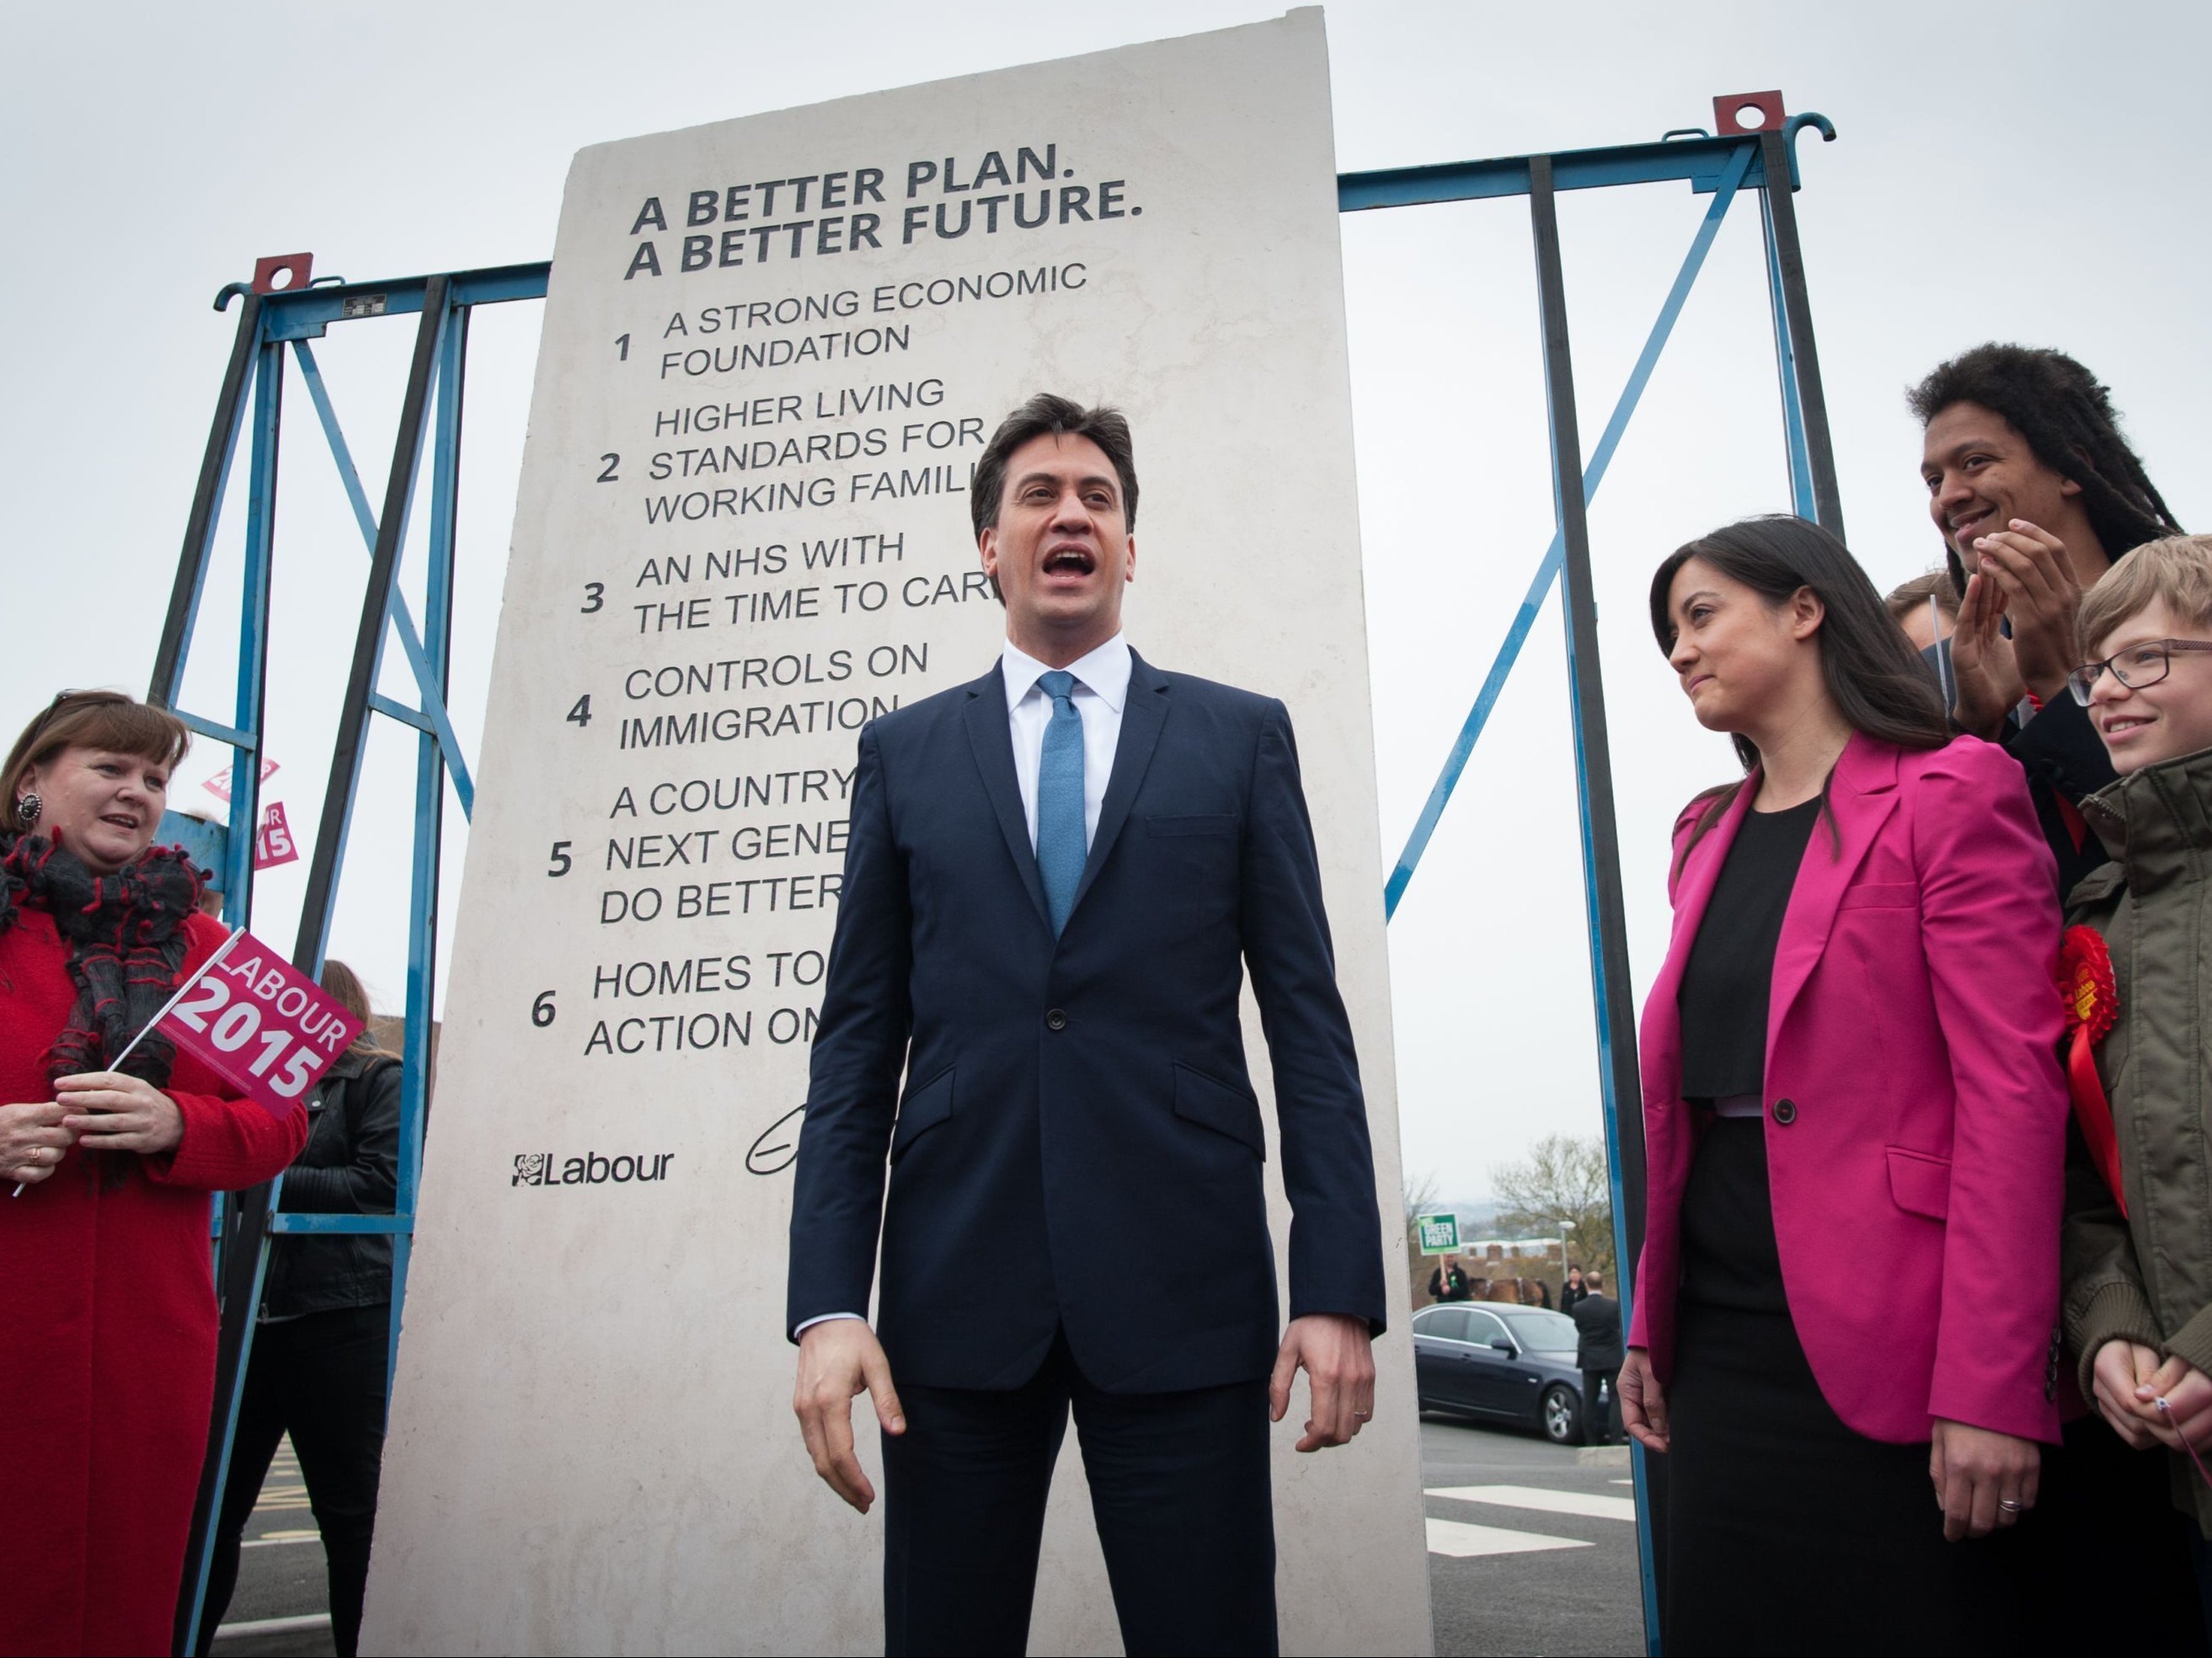 Labour leader Ed Miliband unveils Labour’s pledges carved into a stone plinth in Hastings during general election campaigning on 2 May 2015